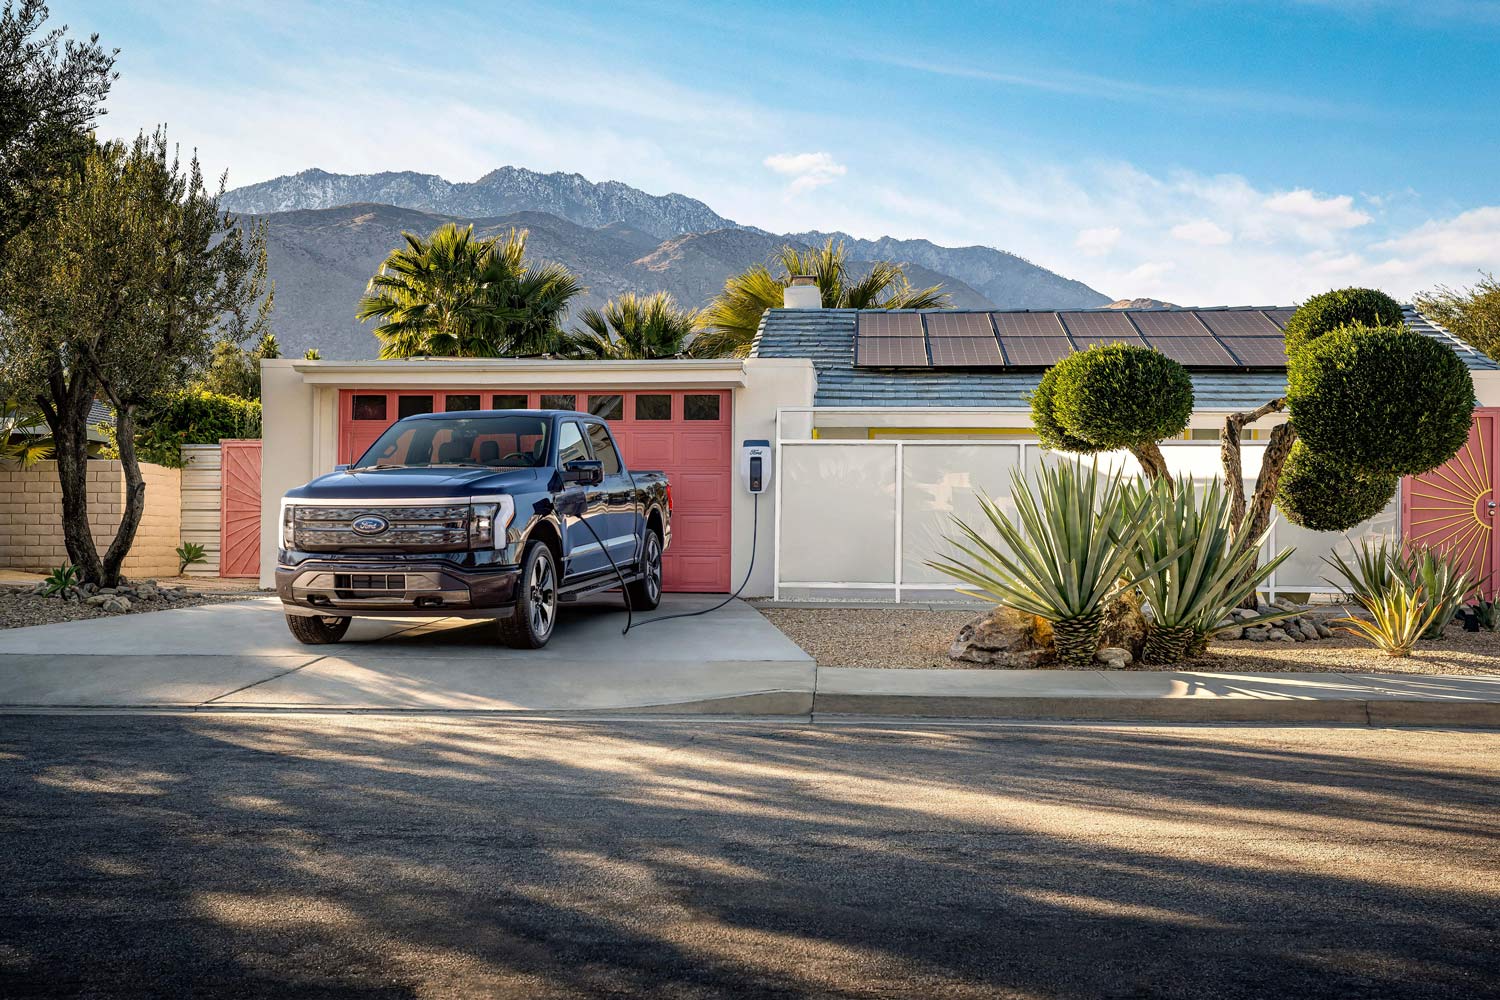 https://autoimage.capitalone.com/cms/Auto/assets/images/1664-hero-what-you-need-to-power-house-2022-ford-f-150-lightning.jpg